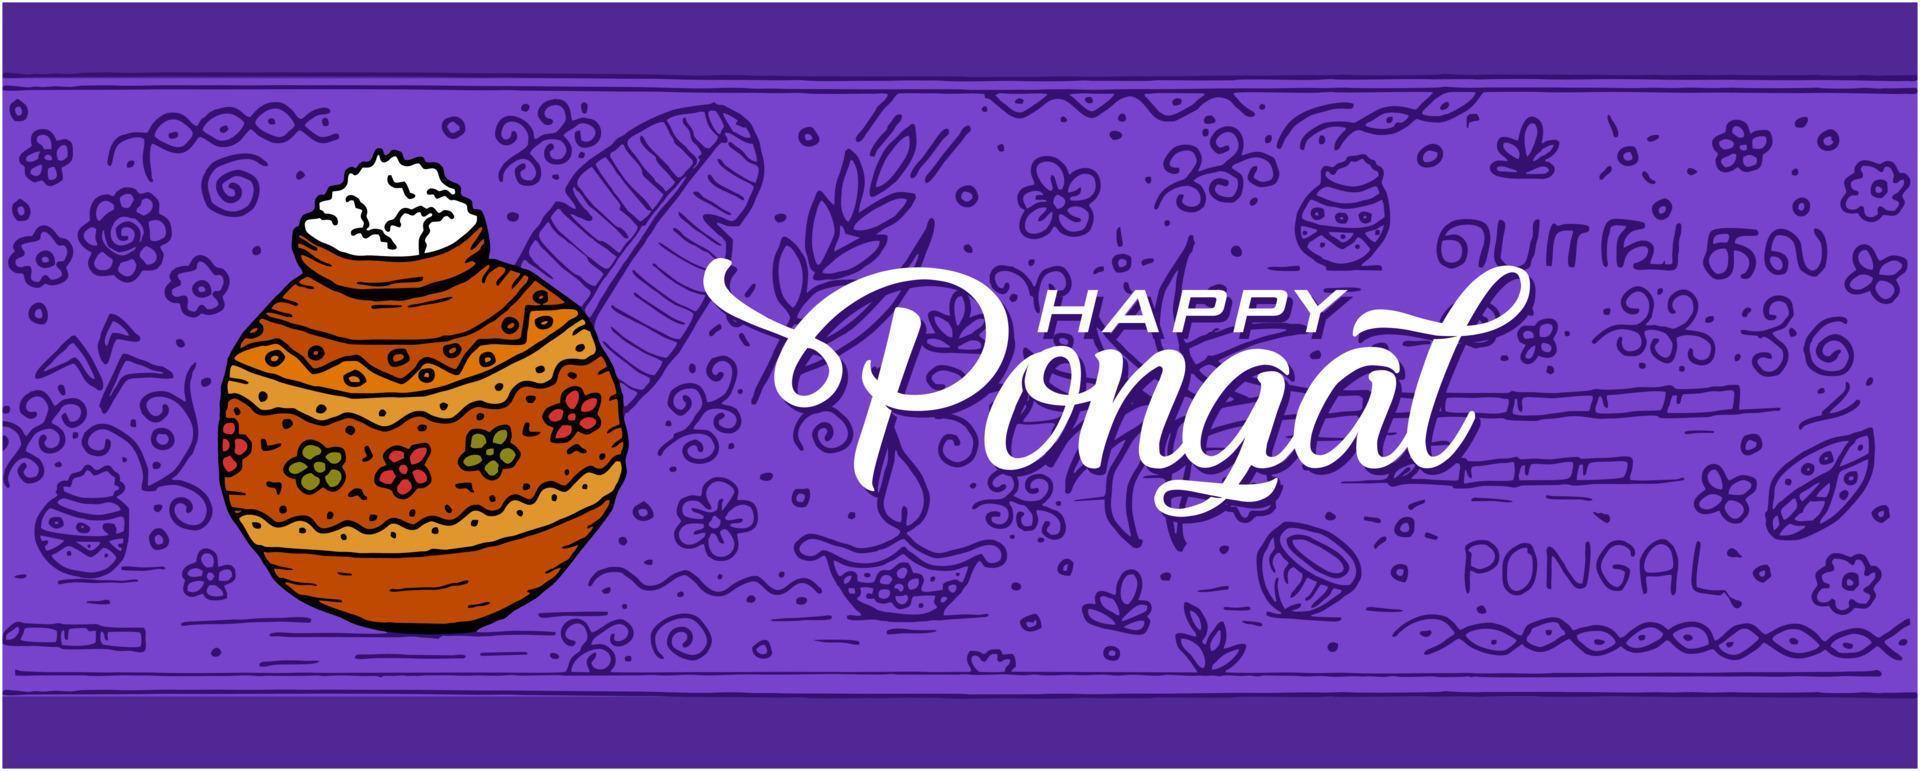 Indian festival pongal wishes doodle sketch old paper vector